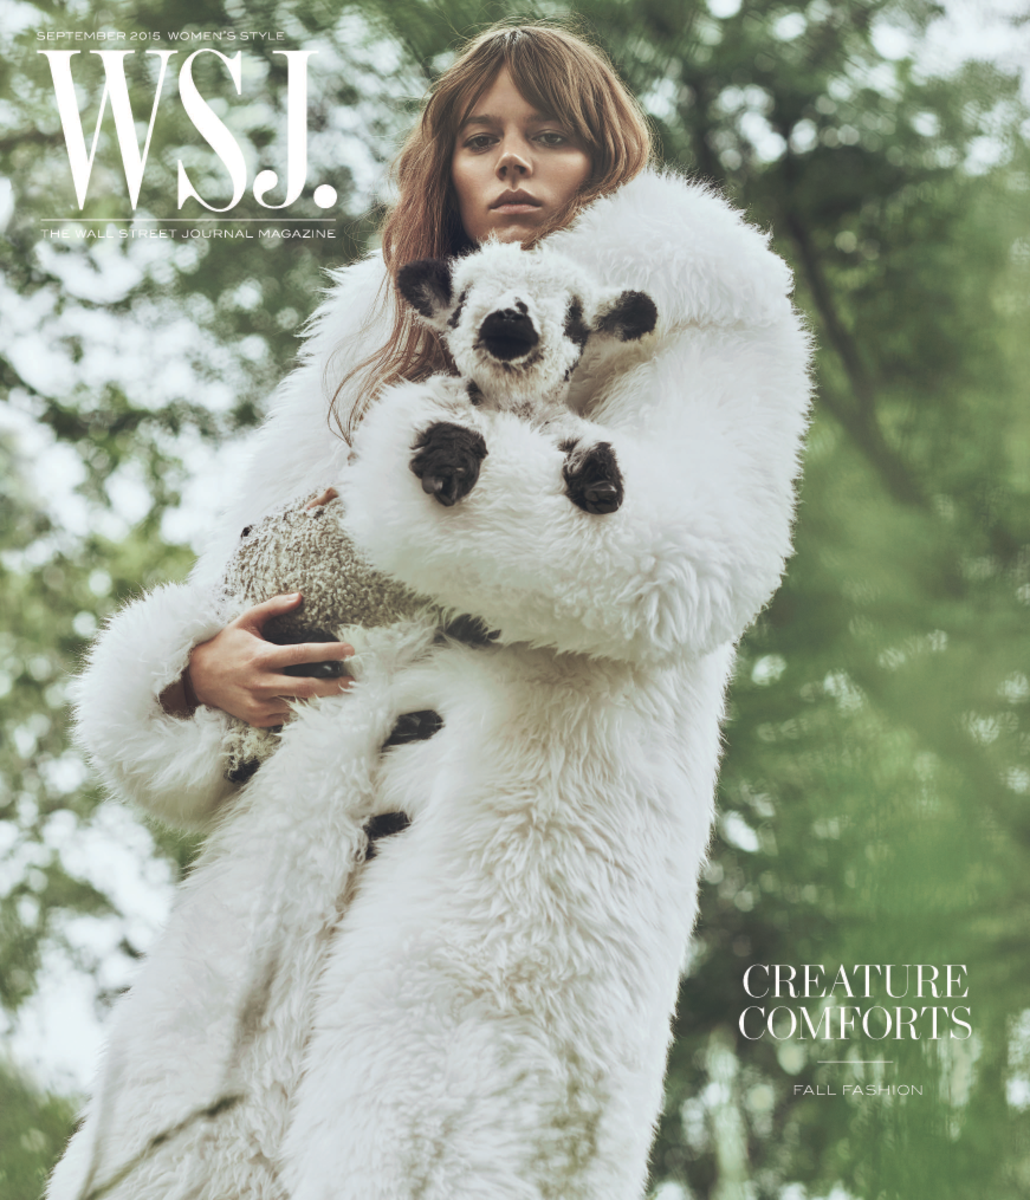 The fashion-focused September issue of 'WSJ' hits newsstands Aug. 15. Photo: Lachlan Bailey/WSJ